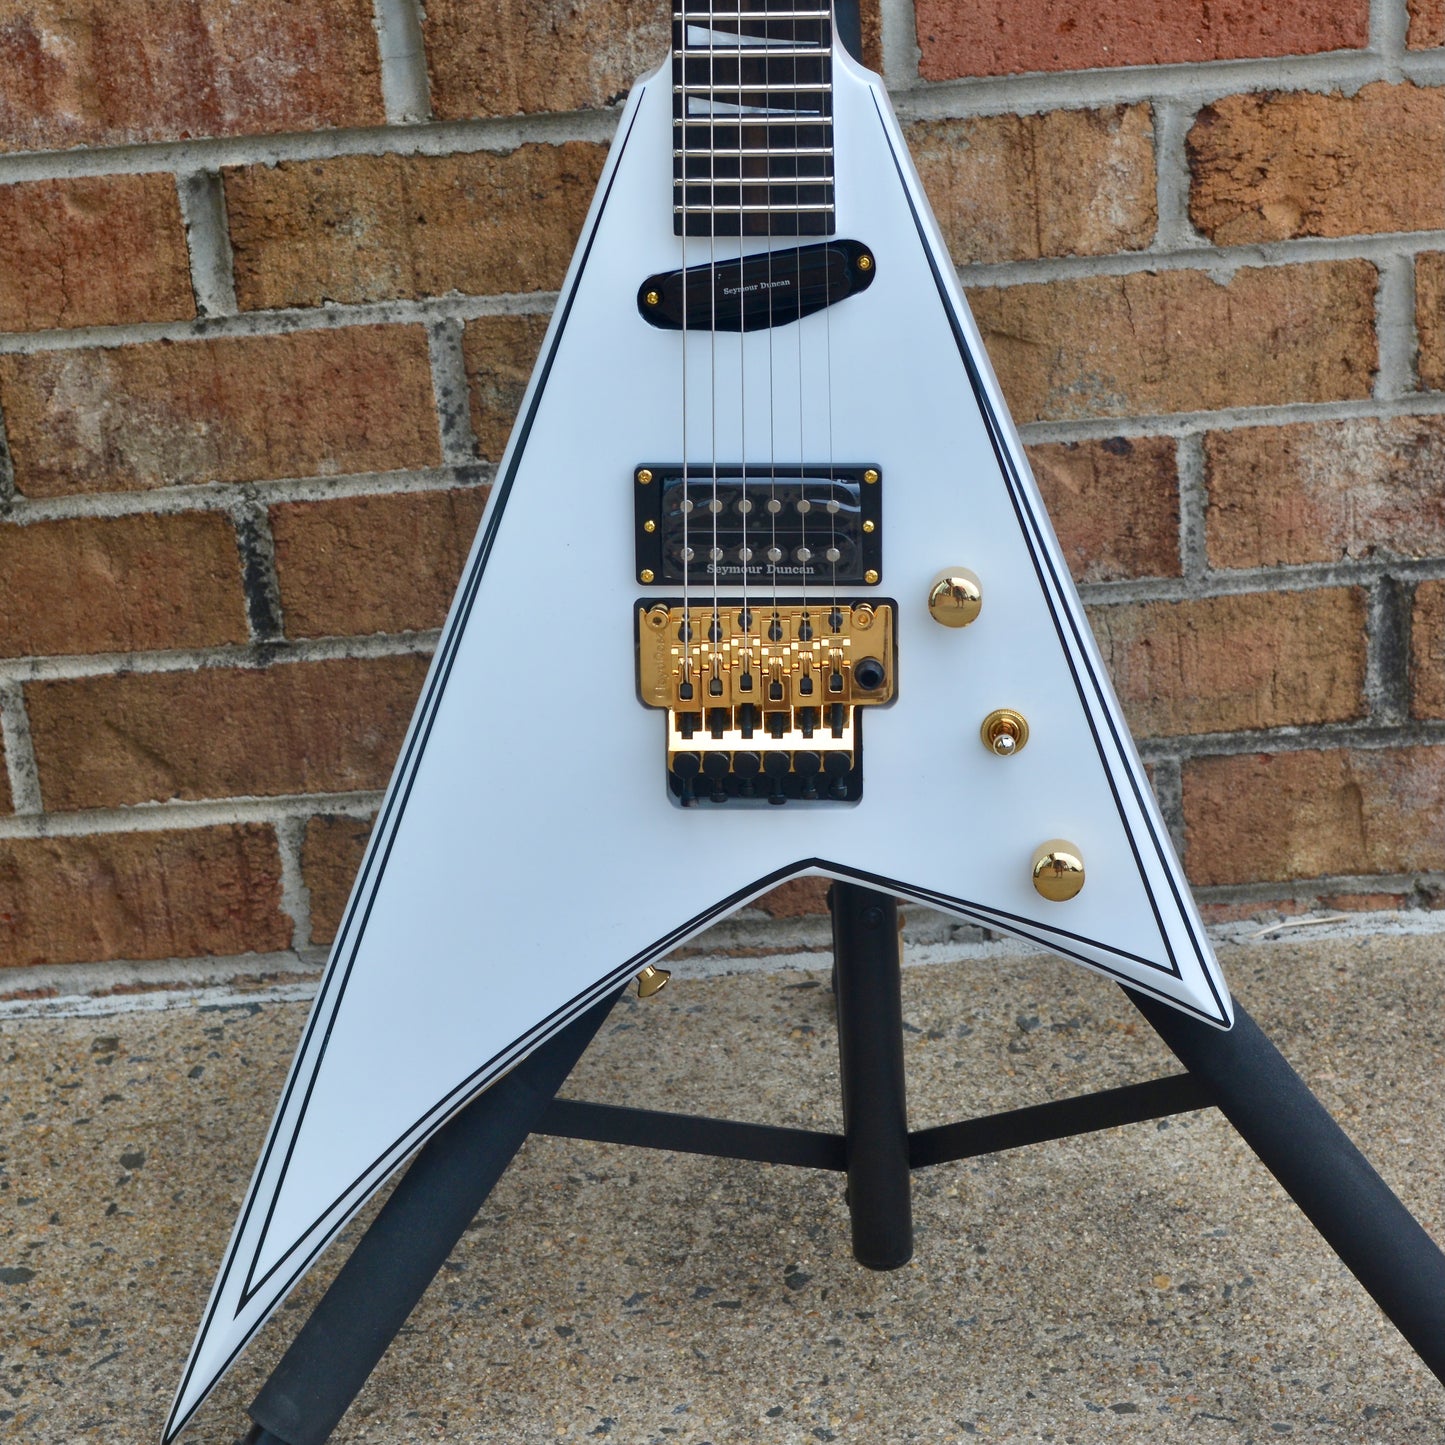 Jackson Concept Series Rhoads RR24 HS, Ebony Fingerboard, White with Black Pinstripes